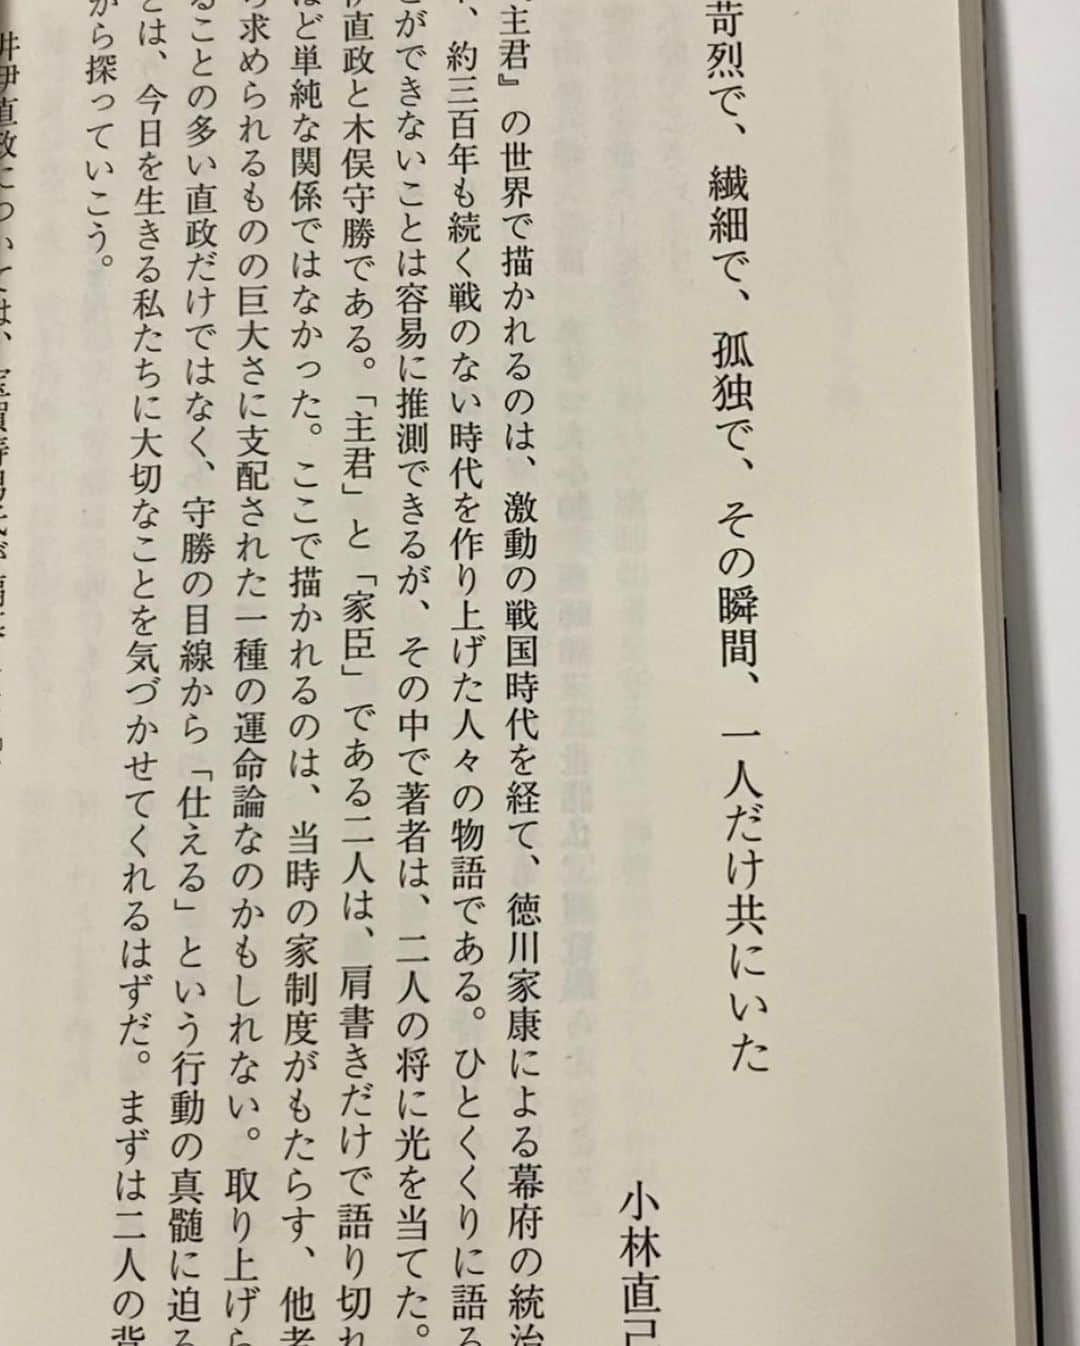 小林直己さんのインスタグラム写真 - (小林直己Instagram)「高殿円さんの歴史小説『主君　井伊の赤鬼・直政伝』の文庫版にて、一万字の解説文「苛烈で、繊細で、孤独で、その瞬間、一人だけ共にいた」を寄稿しました。 （English below）  徳川家康に仕えた井伊直政と木俣守勝という二人の武将の姿から、現代を生きる僕らの人生の意味や仲間、そして使命というものに気付かせてくれます。  歴史小説でありながら、現代にも通ずるメッセージが込められたこの作品に大変感銘を受け、自分が所属するEXILEと比較しながら書かせていただきました。それを許してくれた #高殿円 さんと #文春文庫 編集部  @bunshunbunko に感謝です。  I wrote afterword for this great historical novel “Syukun (meaning: My Lord)“ written by Madoka Takadono. I went on and on and ended up writing 10,000 words. “He was fierce, sensitive, solitary... but at that moment he had one man standing by his side”. The story is about Samurai sprits in 300 years ago and I absolutely loved it! The spirit of Bushido has been a huge part of my values for a long time.  #EXILE #三代目JSOULBROTHERS #三代目JSOULBROTHERSfromEXILETRIBE #三代目JSB #三代目 #3jsb #ldh #小林直己 #NaokiKobayashi  #samurai #katana #bushido #japan #book #文藝文春 #主君 #井伊直政 #木俣守勝 #現代の侍 #魂の約束 #人が人に惚れる #一万字 #実は字数を勘違いしてた笑 #直己賞」12月7日 12時45分 - naokikobayashi_works